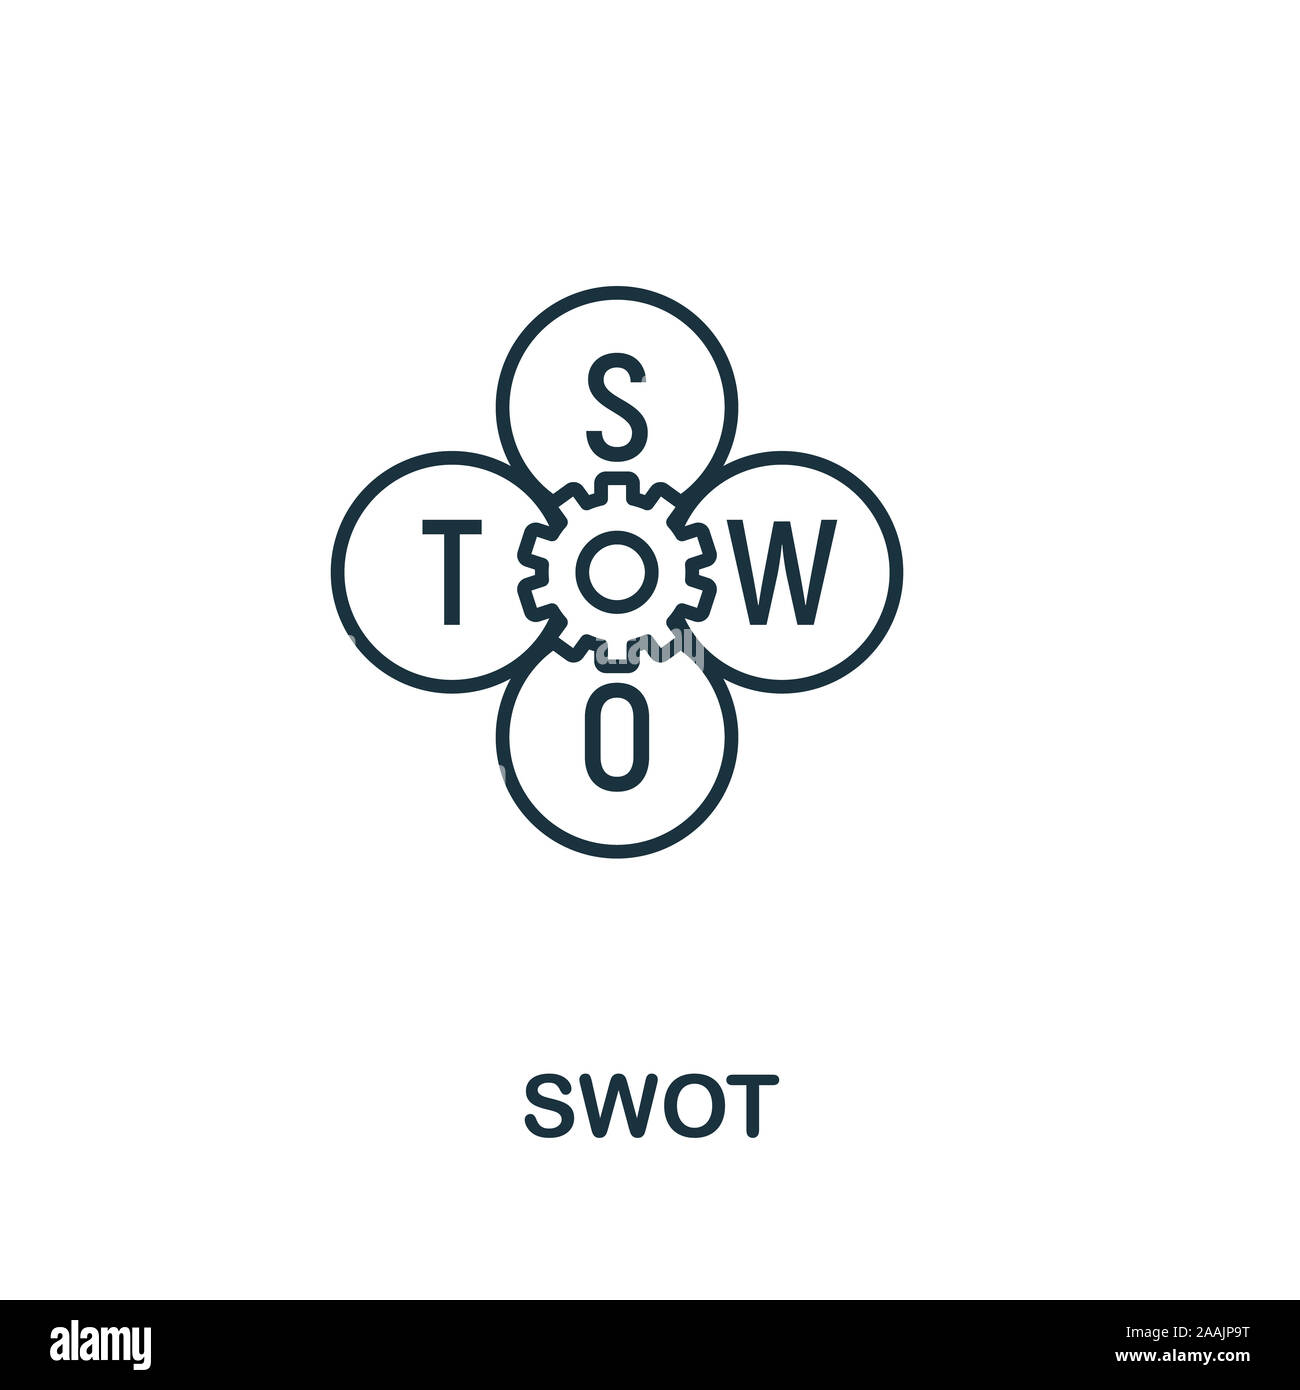 Swot outline icon. Thin line concept element from fintech technology icons collection. Creative Swot icon for mobile apps and web usage Stock Photo